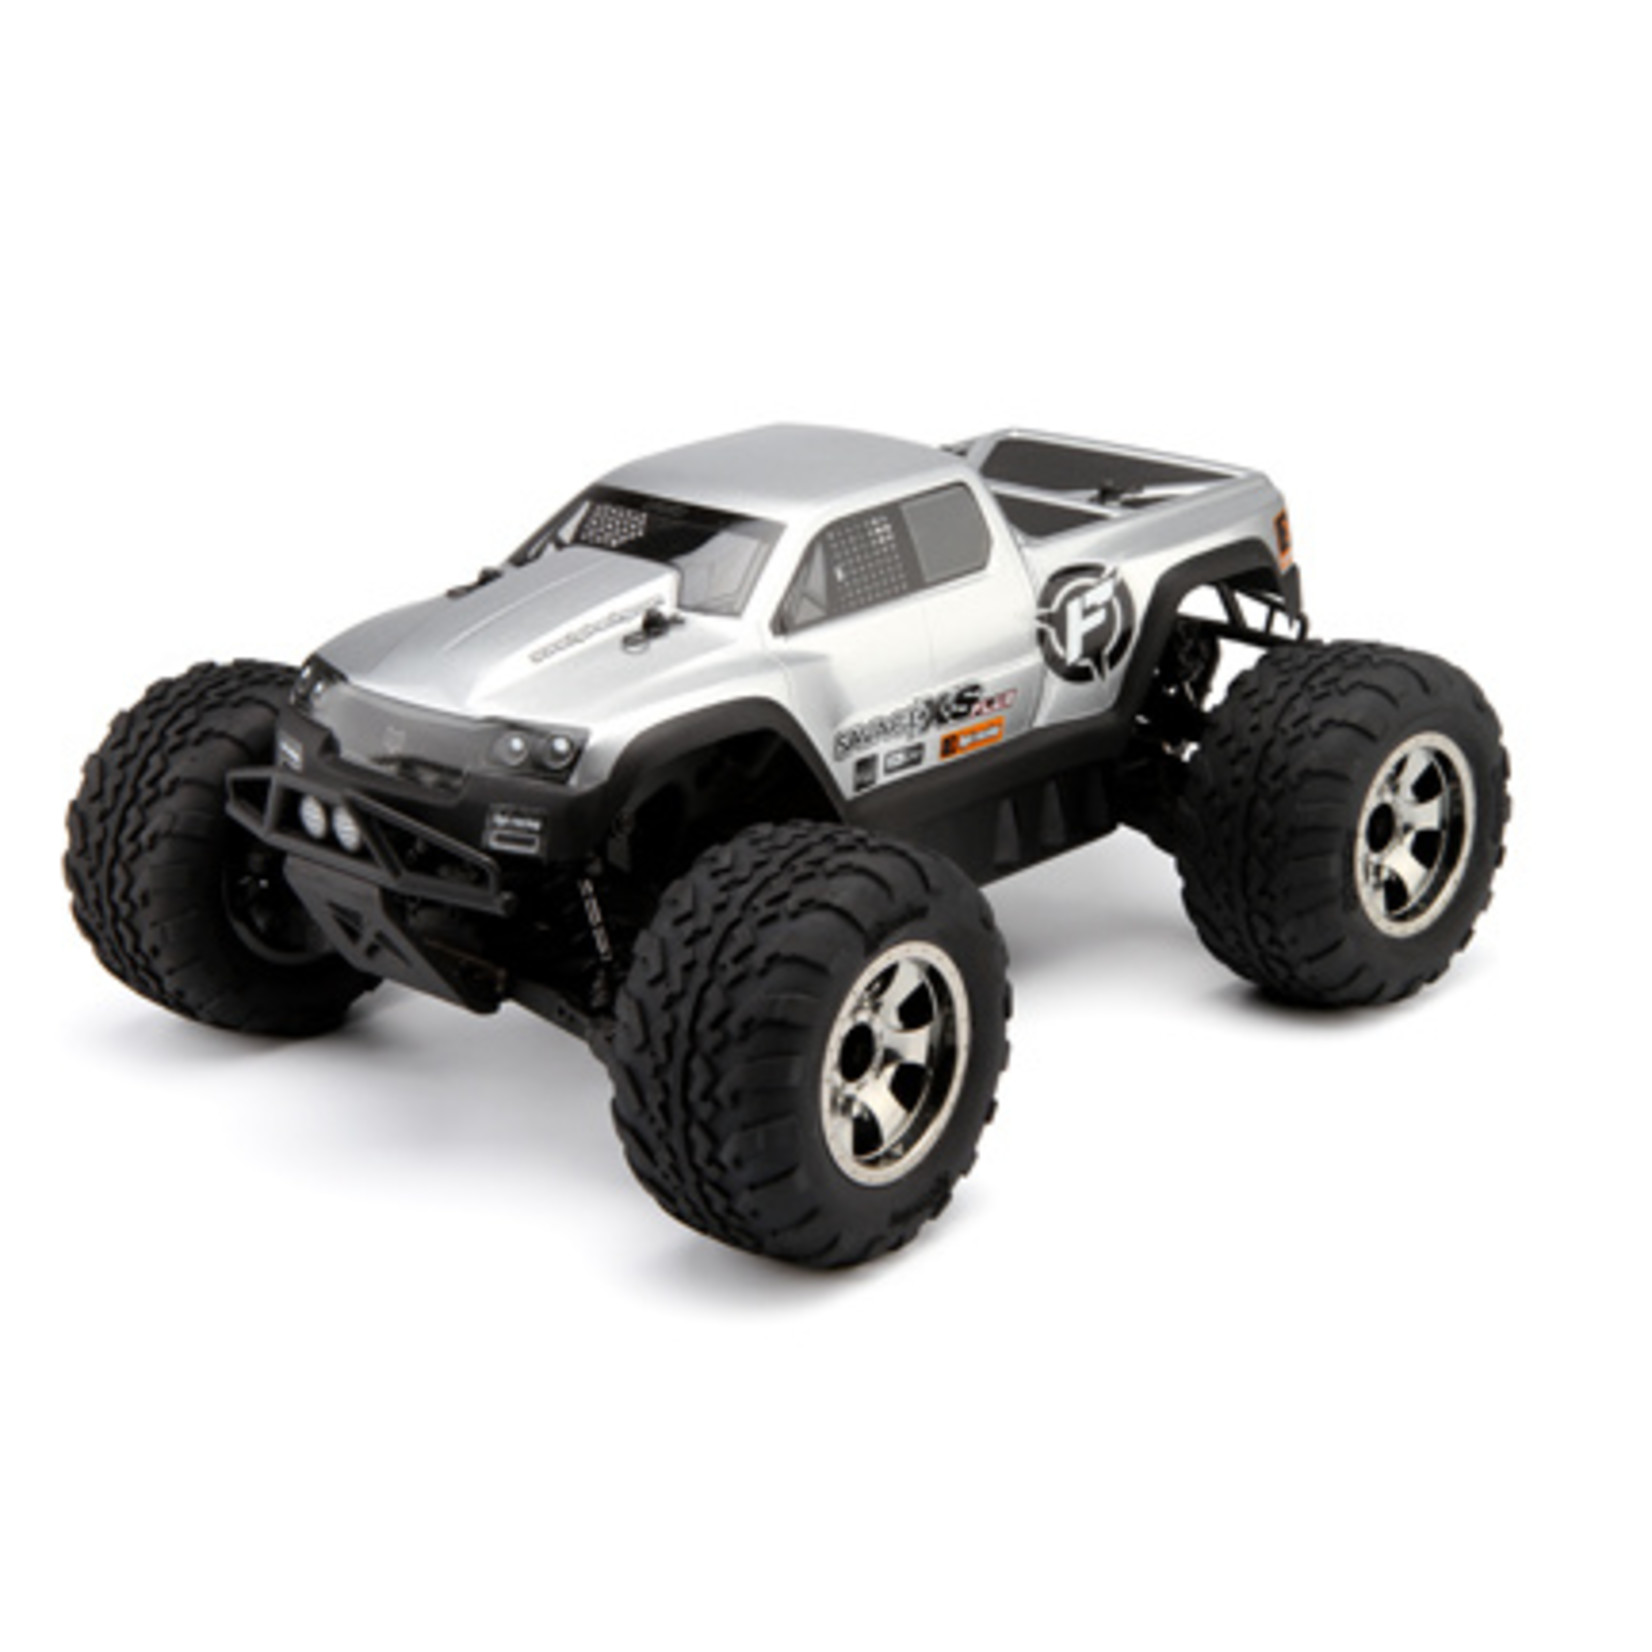 HPI Racing GT-2XS Truck Body Savage XS - Extreme R/C Hobbies